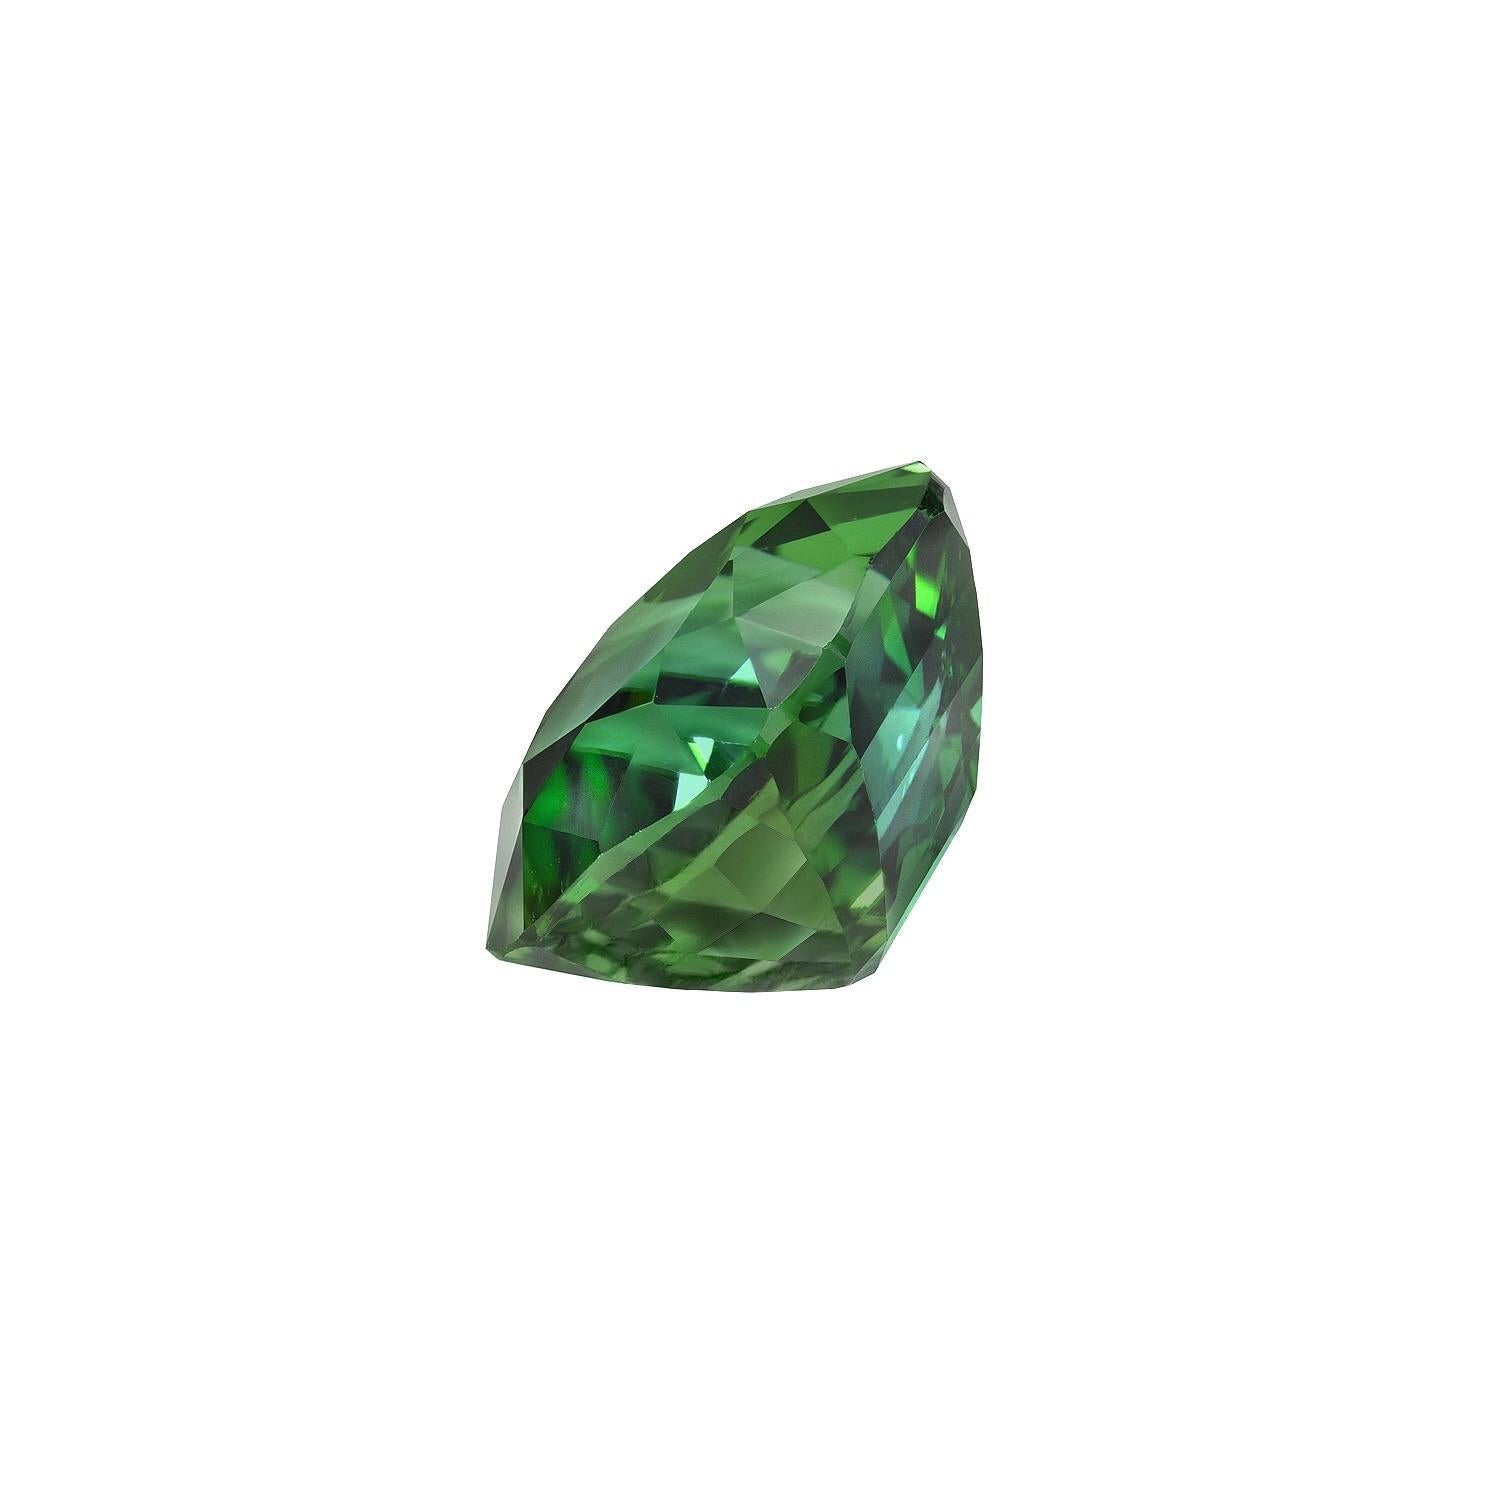 6.51 carat Green Tourmaline cushion gem, offered loose to a gemstone lover.
Returns are accepted and paid by us within 7 days of delivery.
We offer supreme custom jewelry work upon request. Please contact us for more details.
For your convenience we